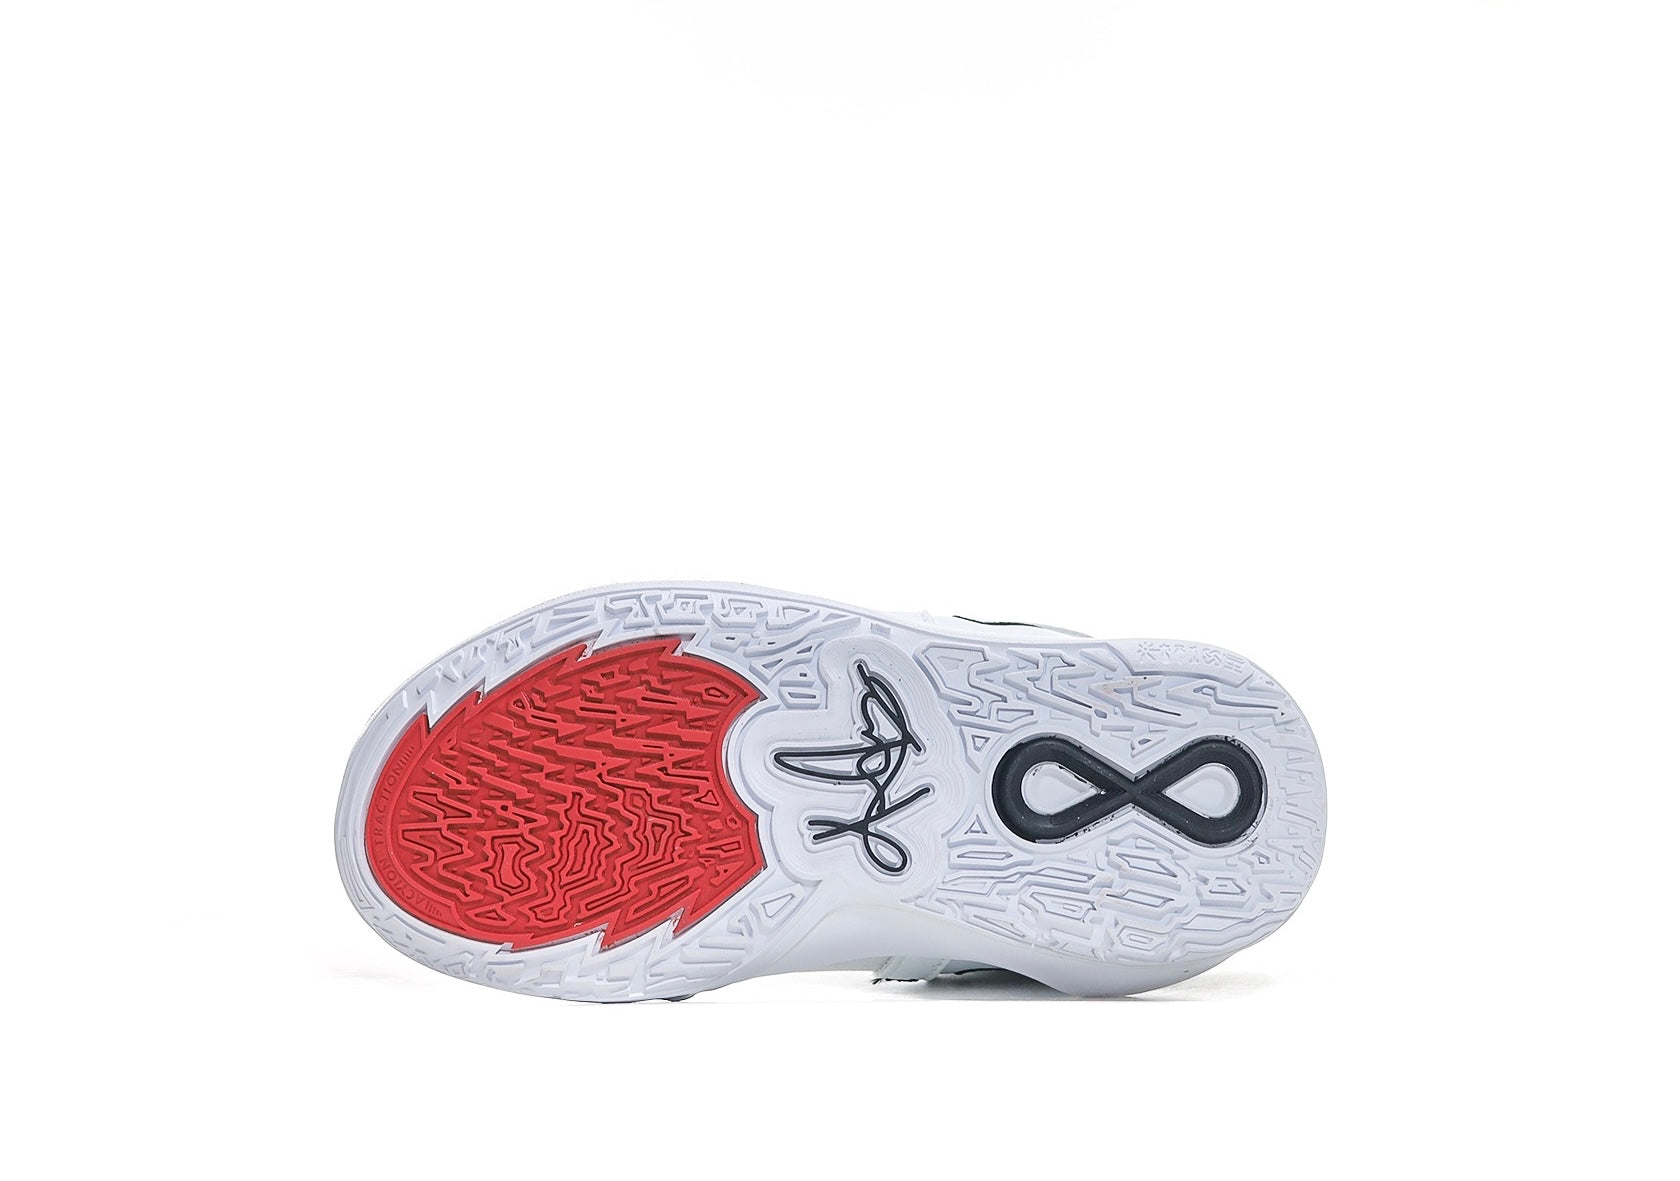 Nike kyrie infinity EP white/ red shoes